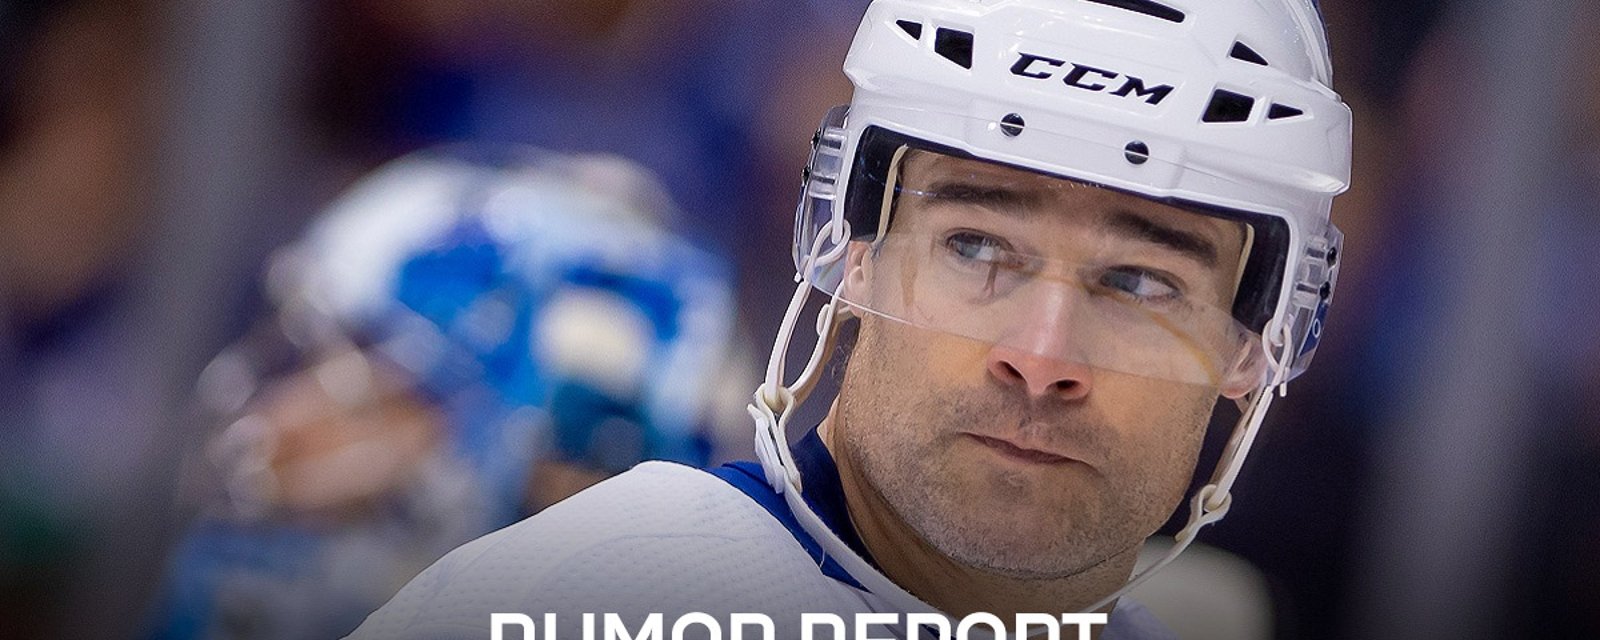 Rumor: Patrick Marleau will be back in the NHL this season.